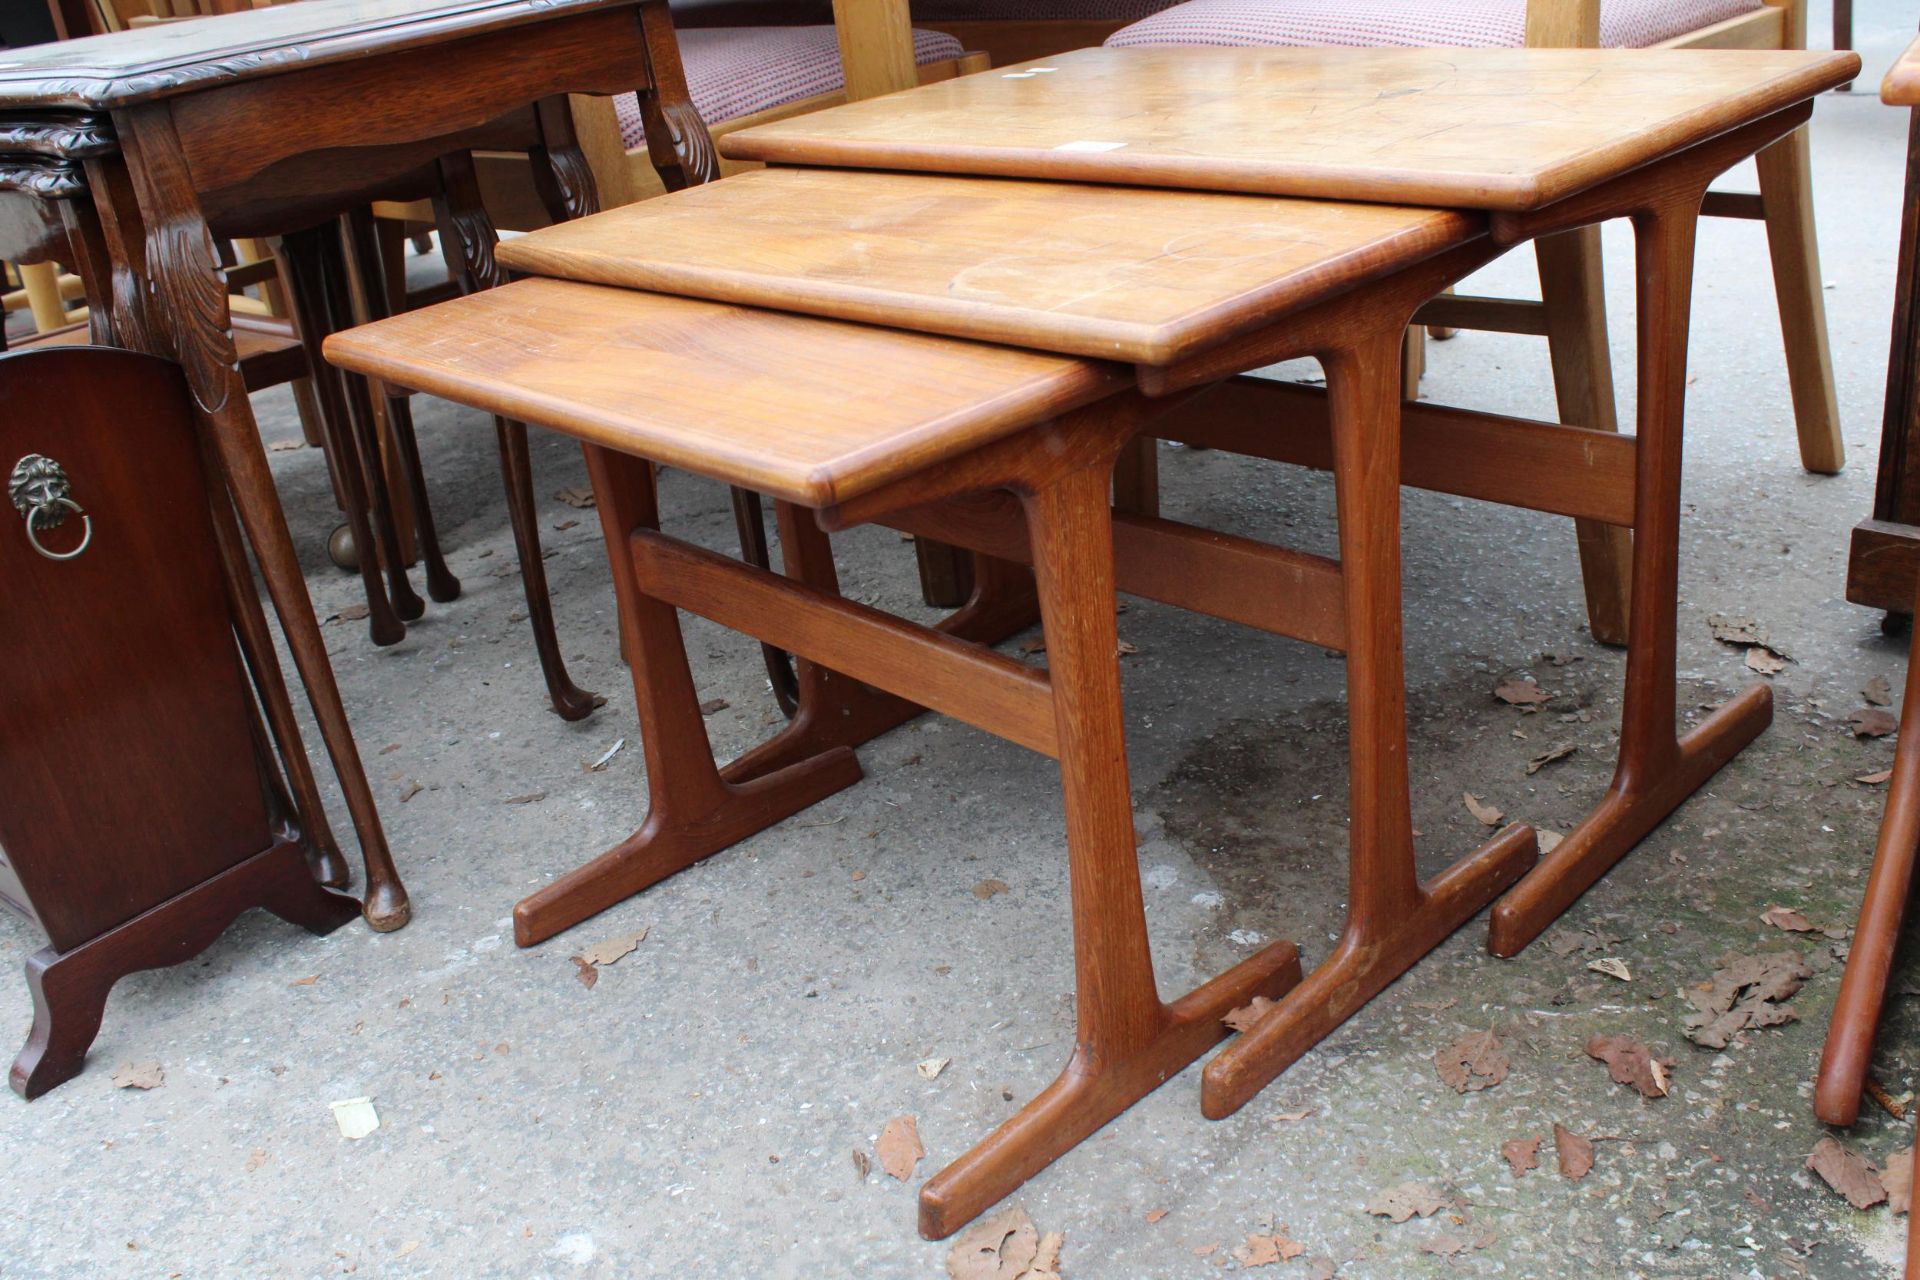 A RETRO TEAK NEST OF THREE TABLES STAMPED 'MADE IN DENMARK' - Image 2 of 3